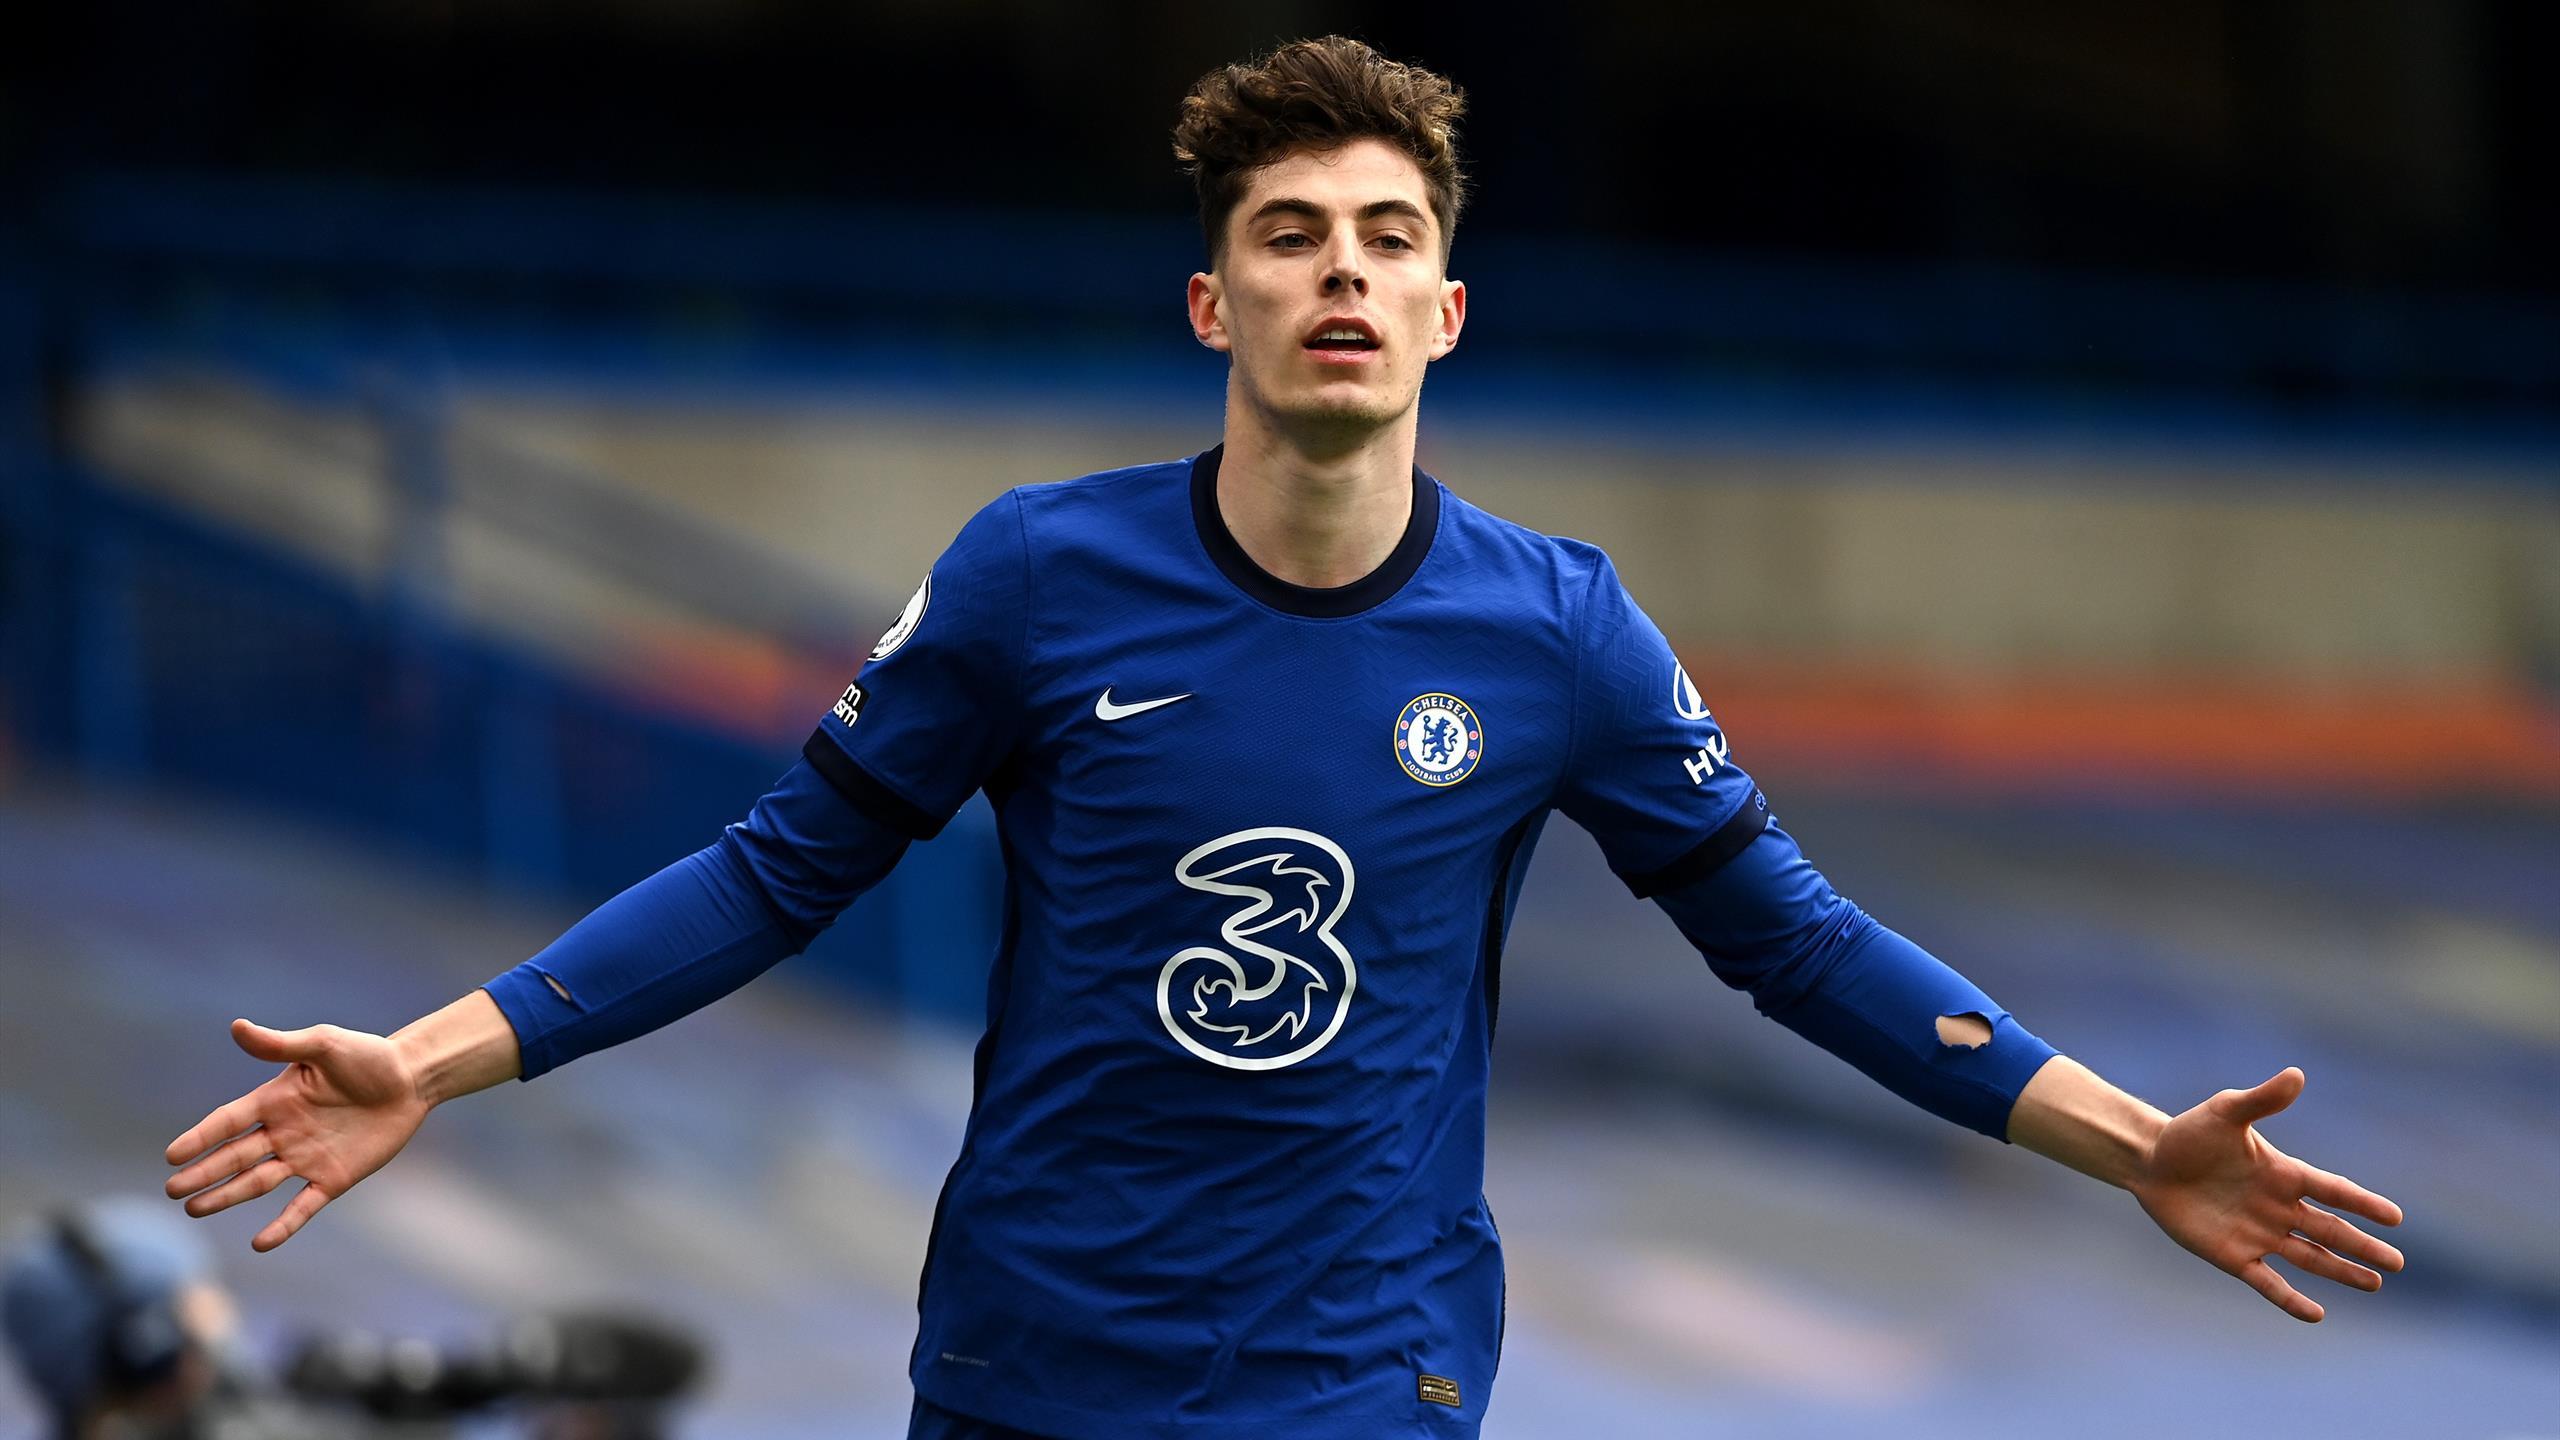 CLEEVO on Twitter Kai Havertz wallpaper for you  Simular to a previous  graphic i made a while back  CFC ChelseaFC Chelsea kaihavertz29  ChelseaFCinUSA httpstcozGRRdK9hx0  X